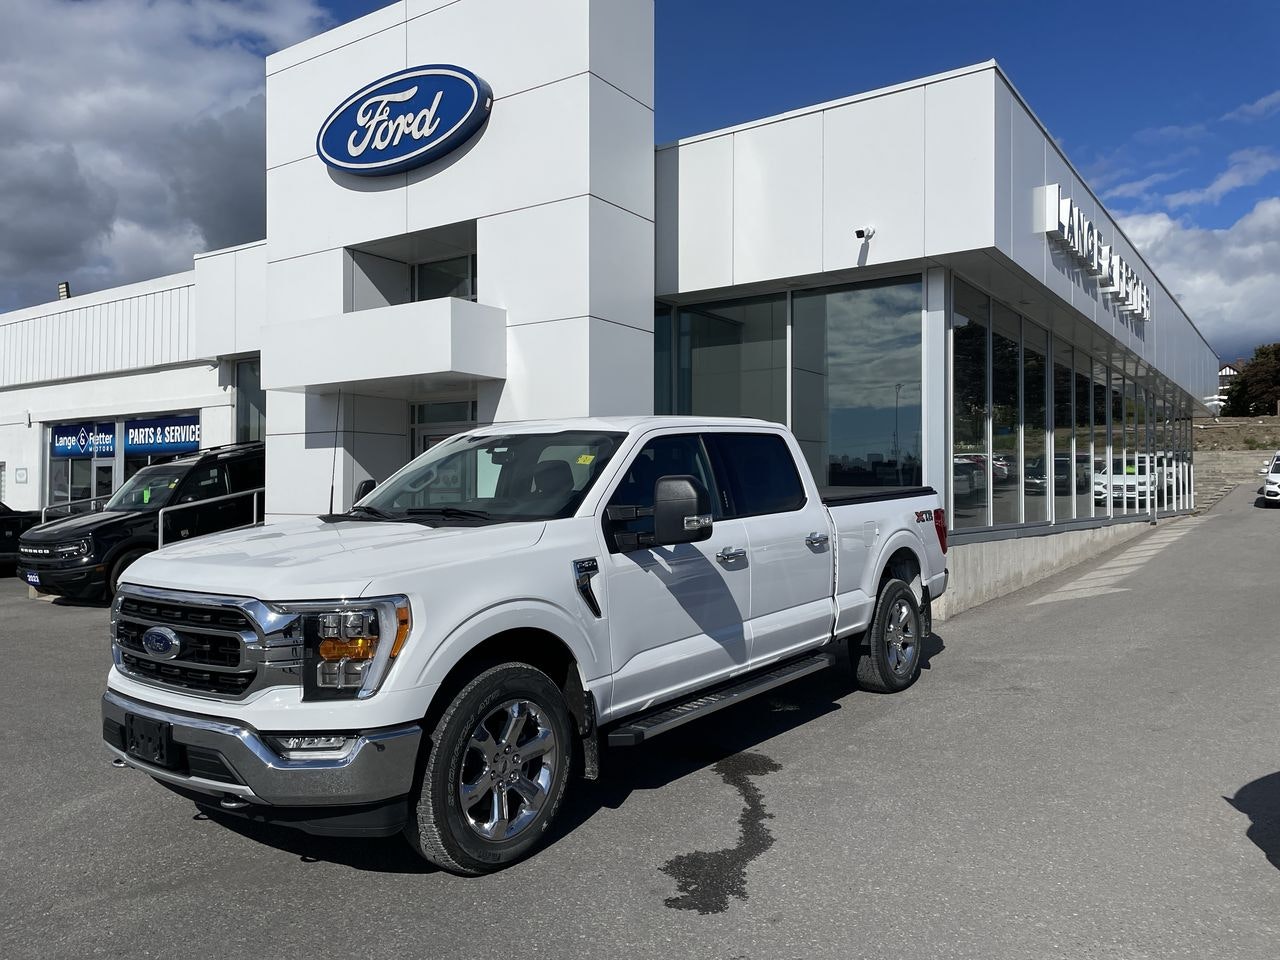 2021 Ford F-150 - 21364A Full Image 1